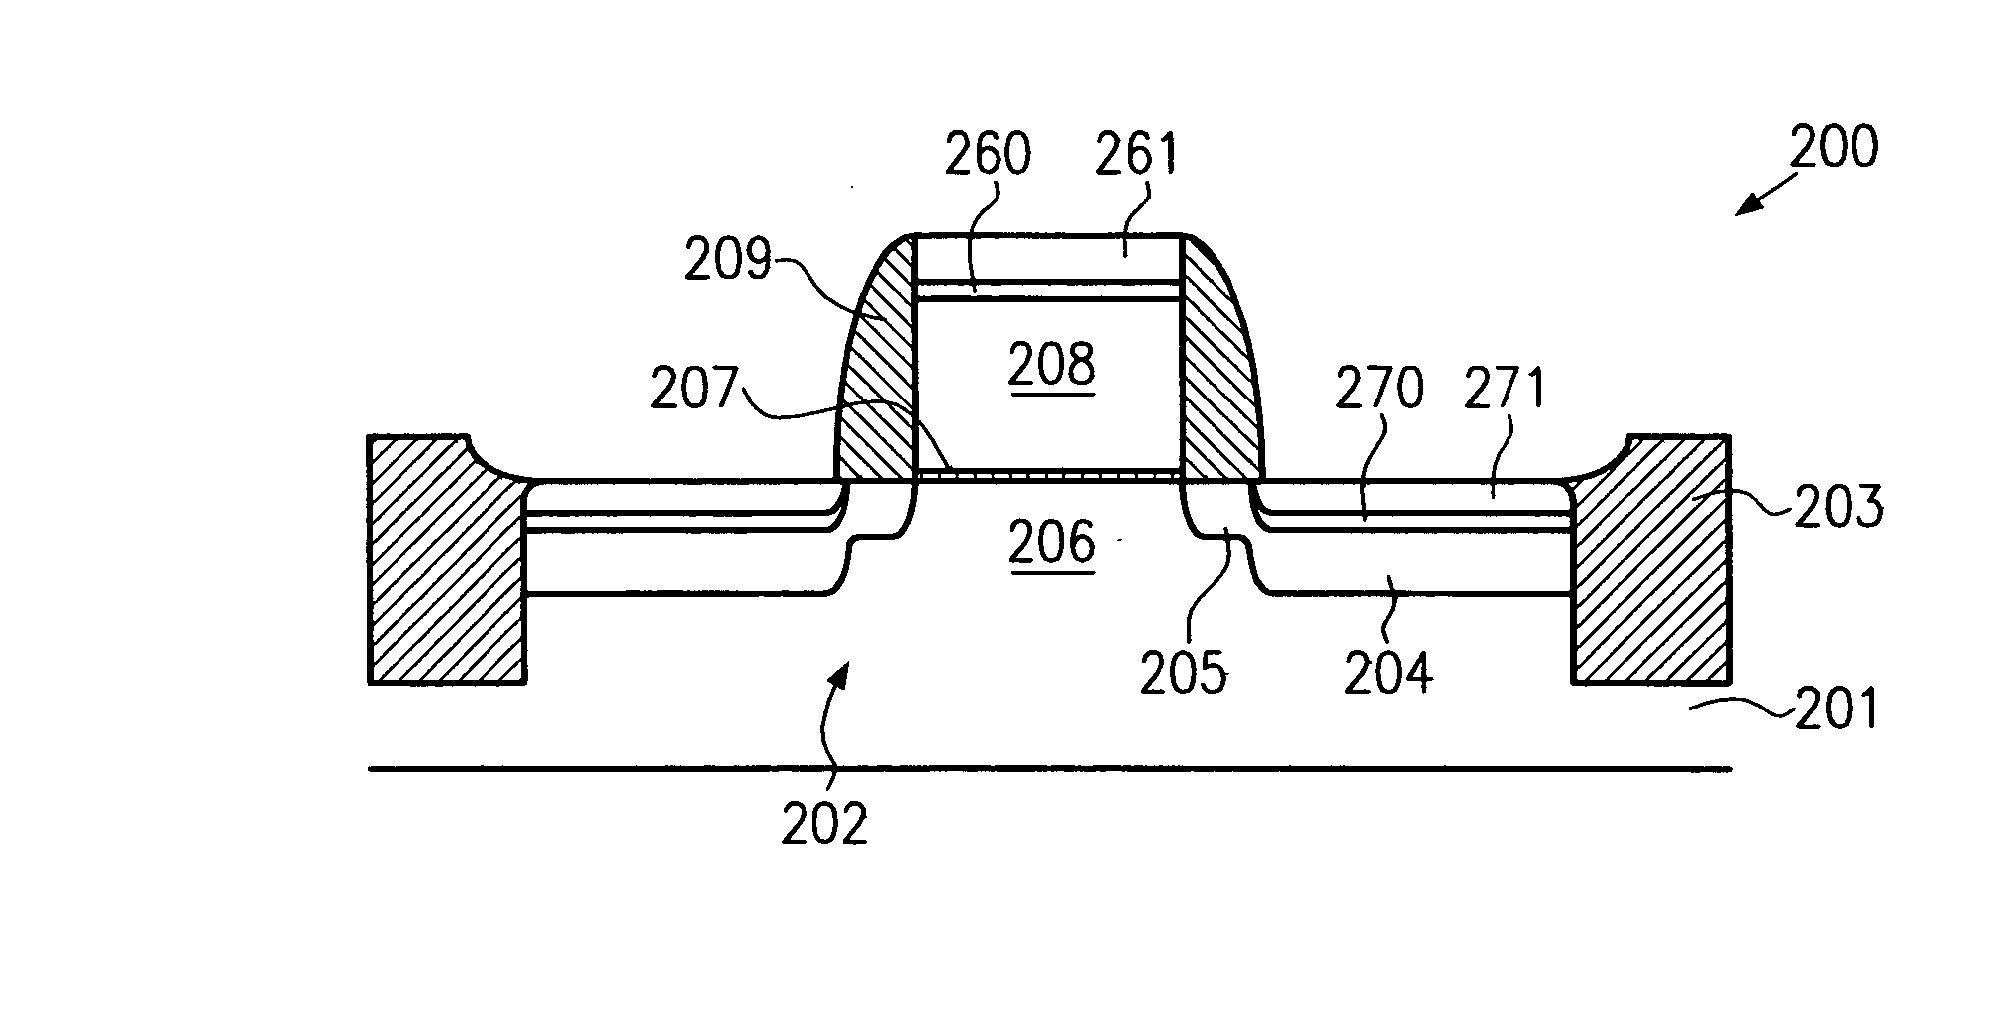 Semiconductor device having a nickel/cobalt silicide region formed in a silicon region